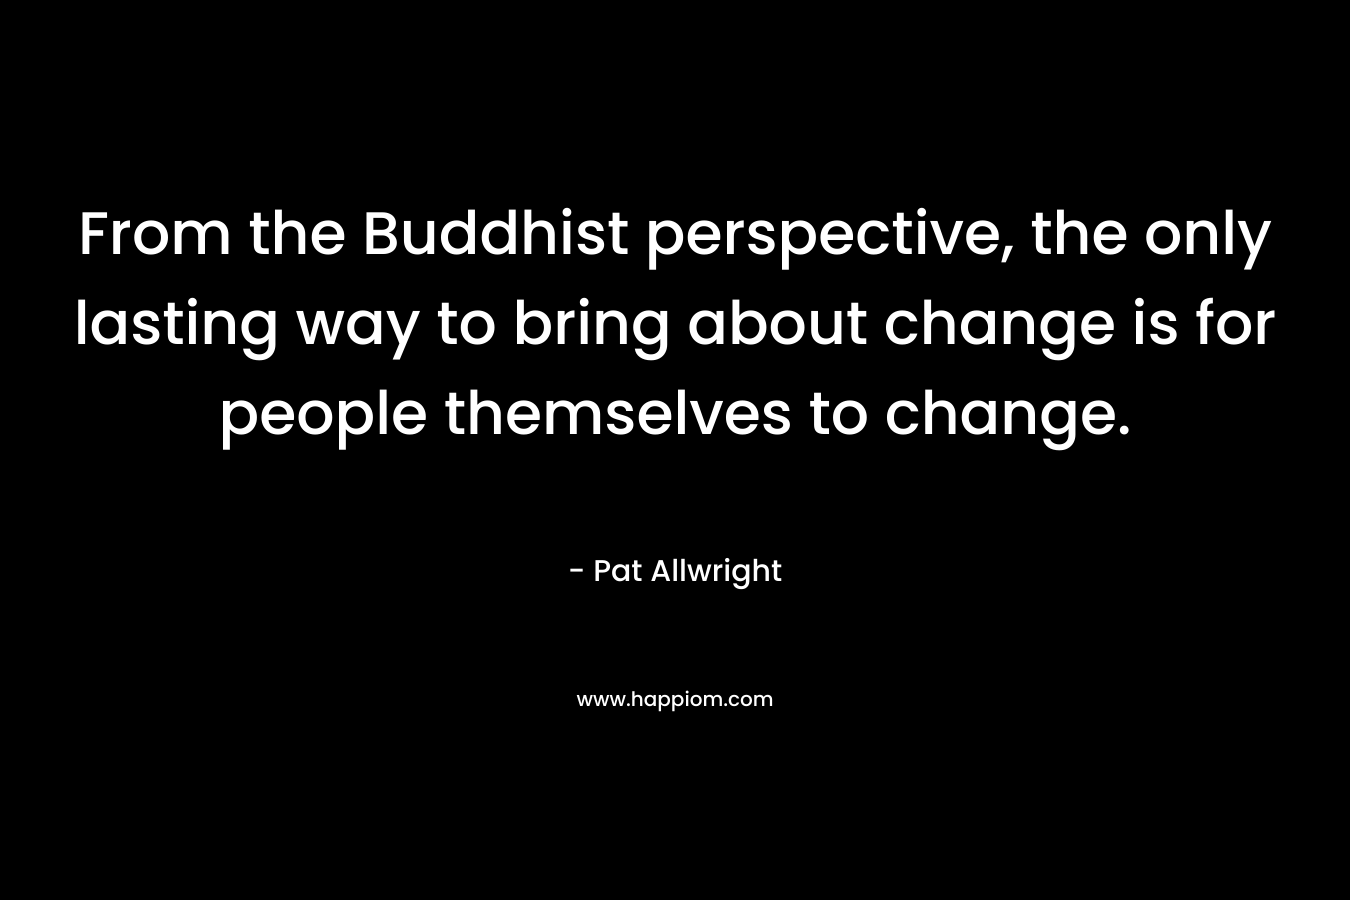 From the Buddhist perspective, the only lasting way to bring about change is for people themselves to change.